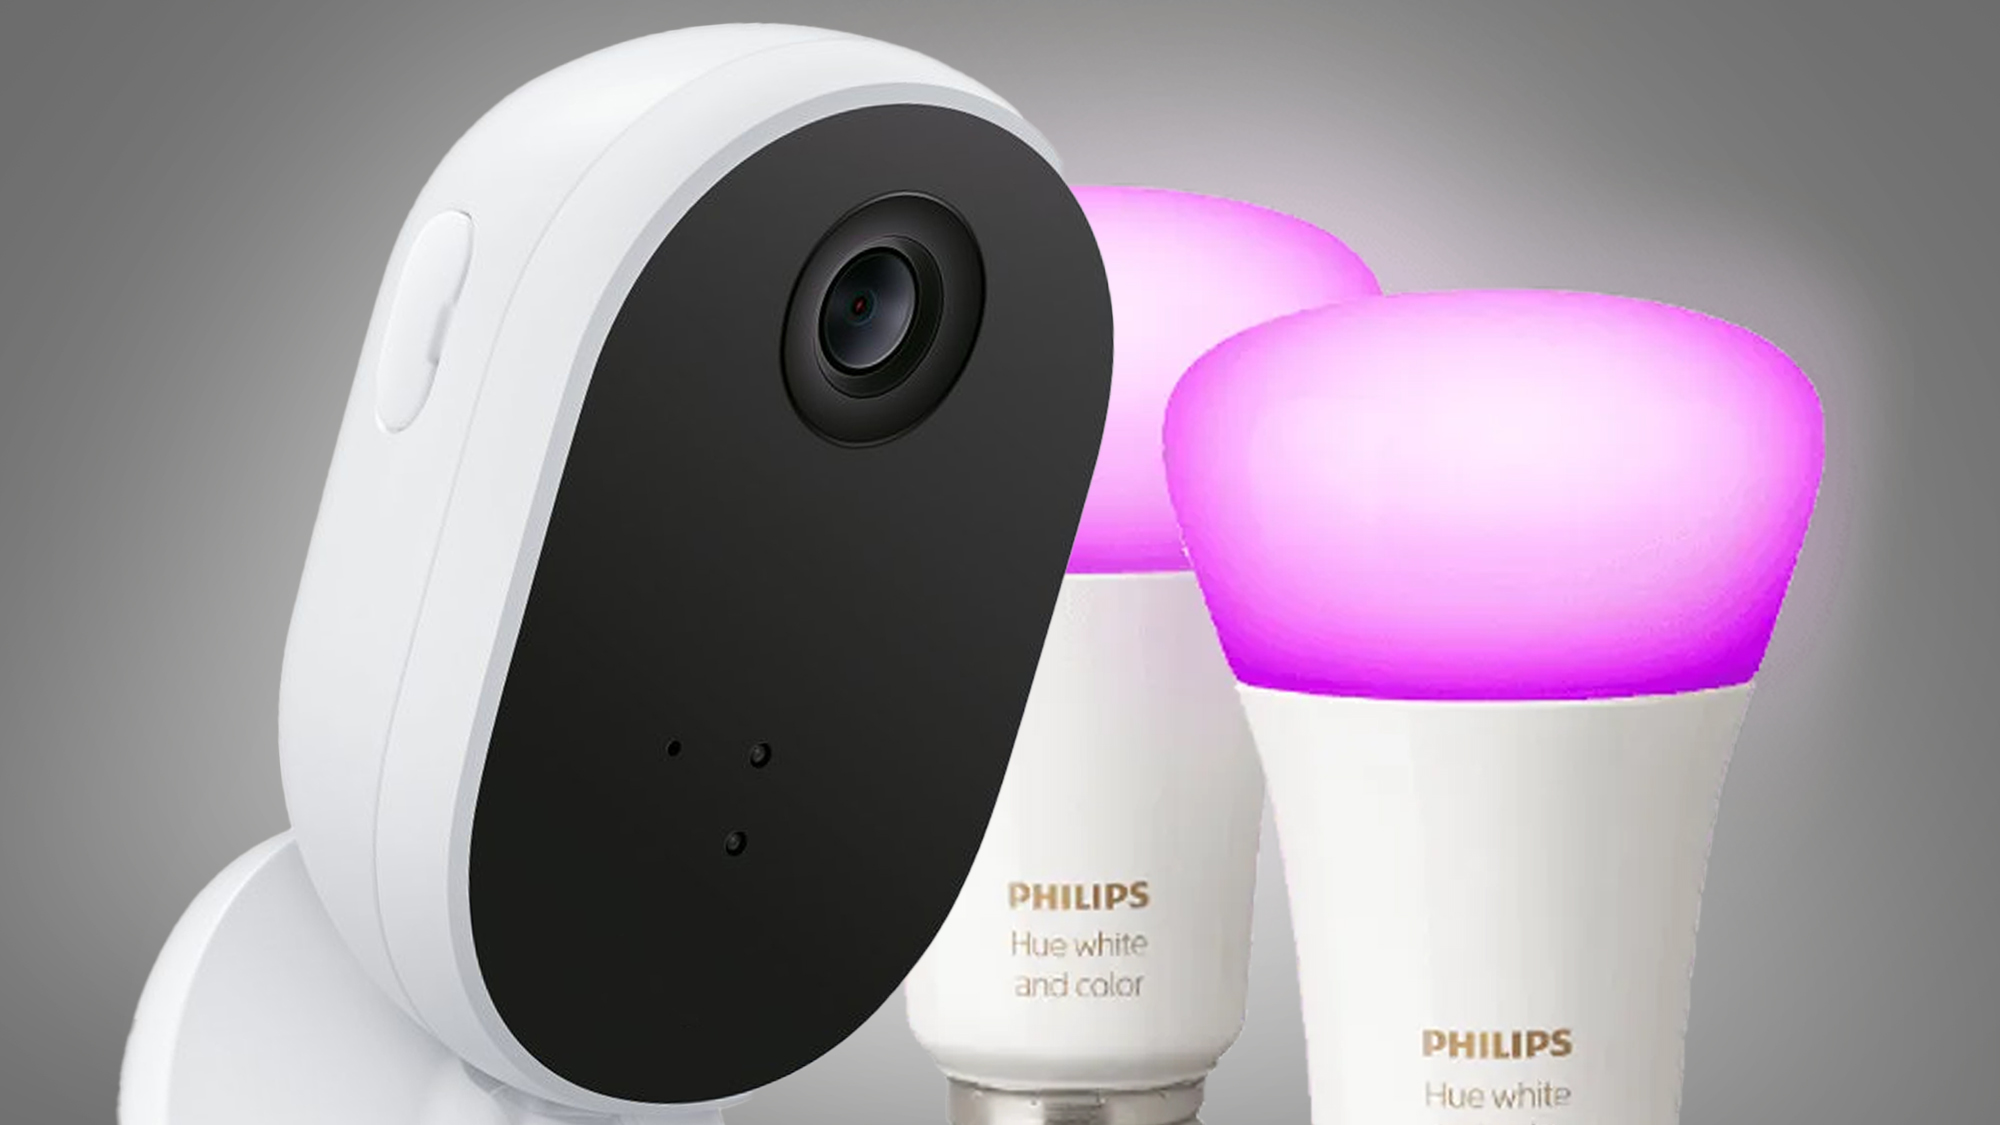 Philips Hue says it's making smart home cameras that can bamboozle